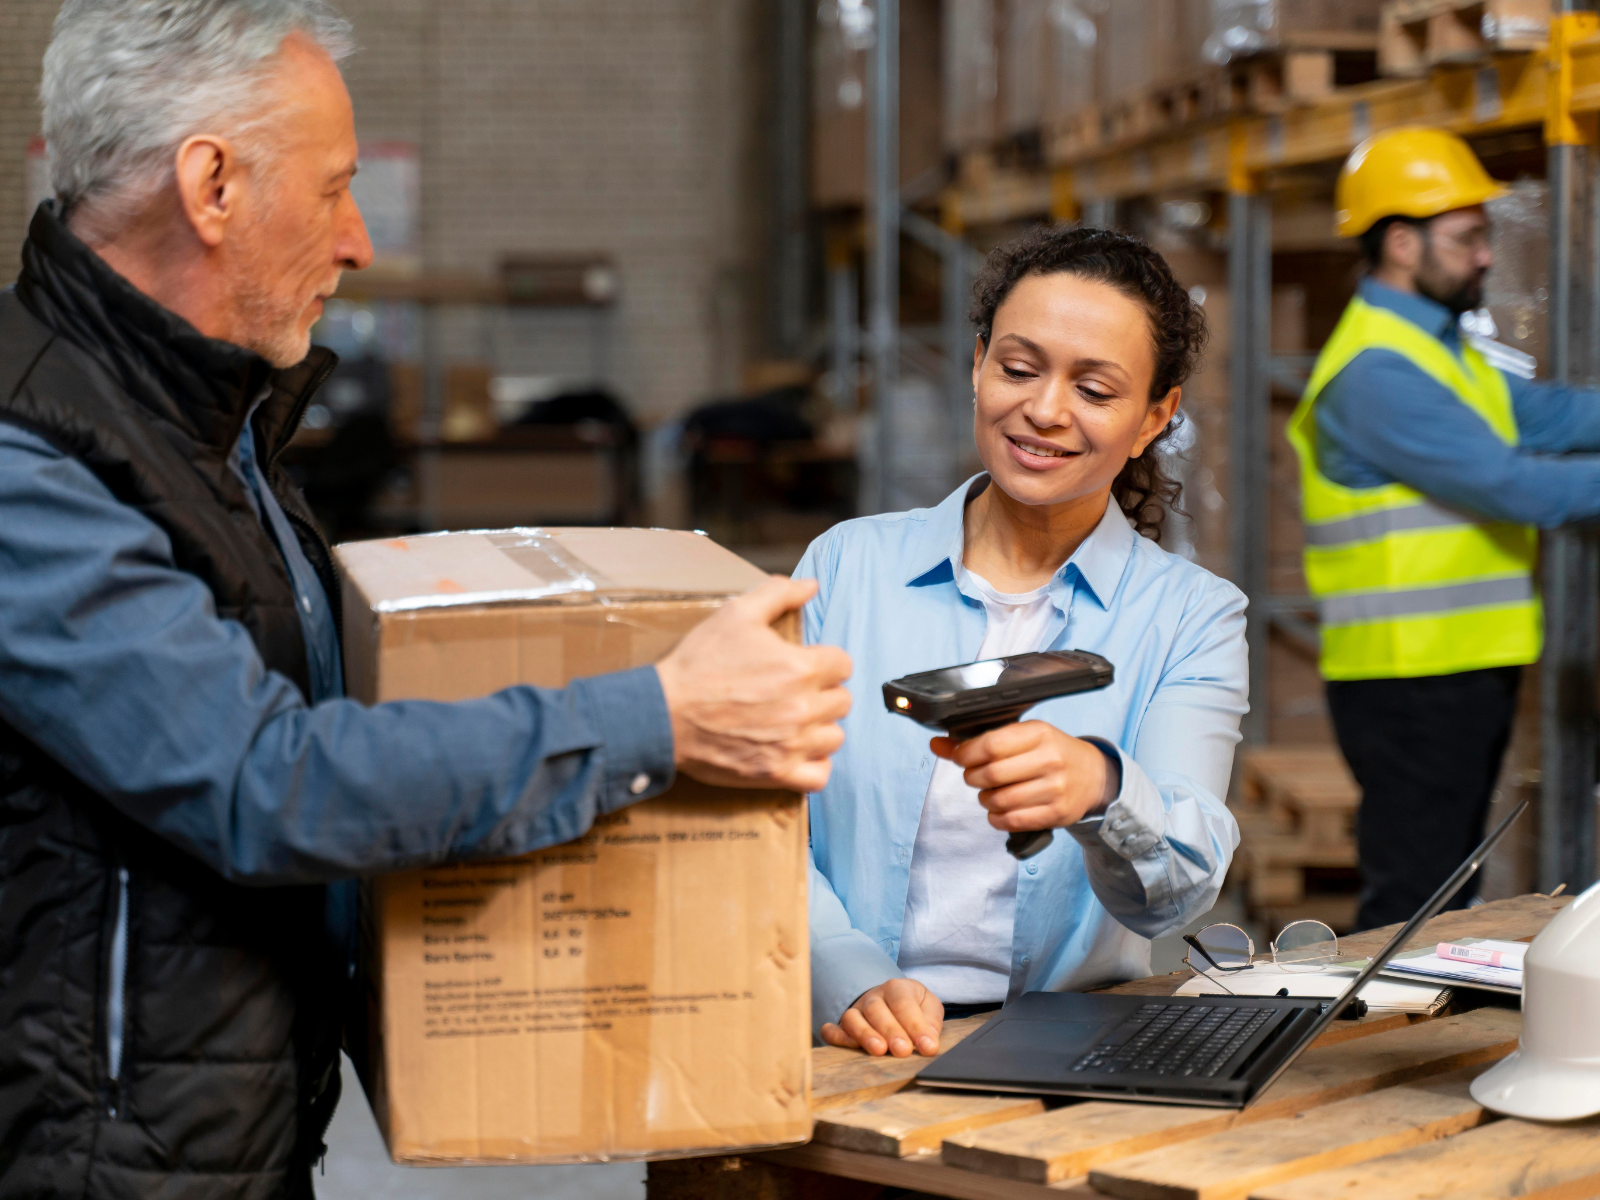 happy woman scanning a box in a warehouse with other happy employees in the background